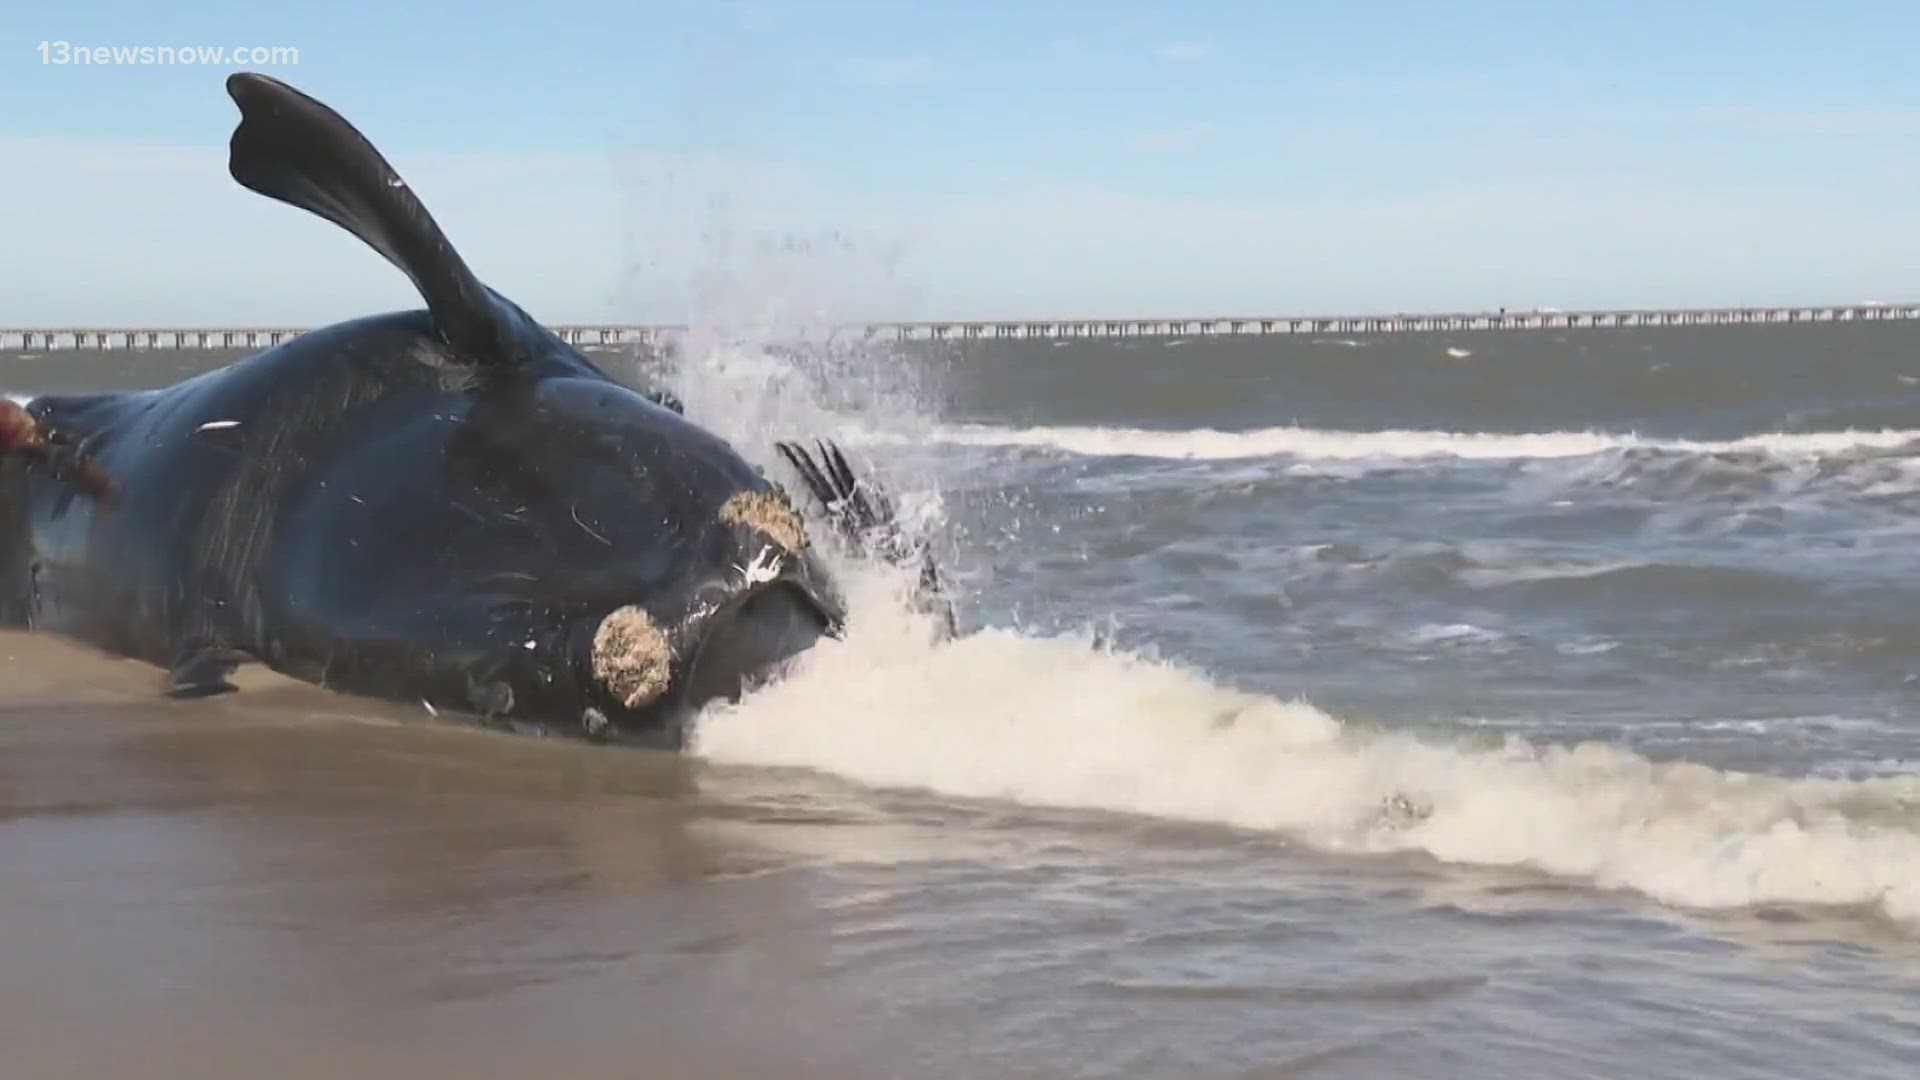 In the days leading up to an endangered whale washing ashore in Virginia Beach, Oceana tracked hundreds of boats speeding in a restricted area.